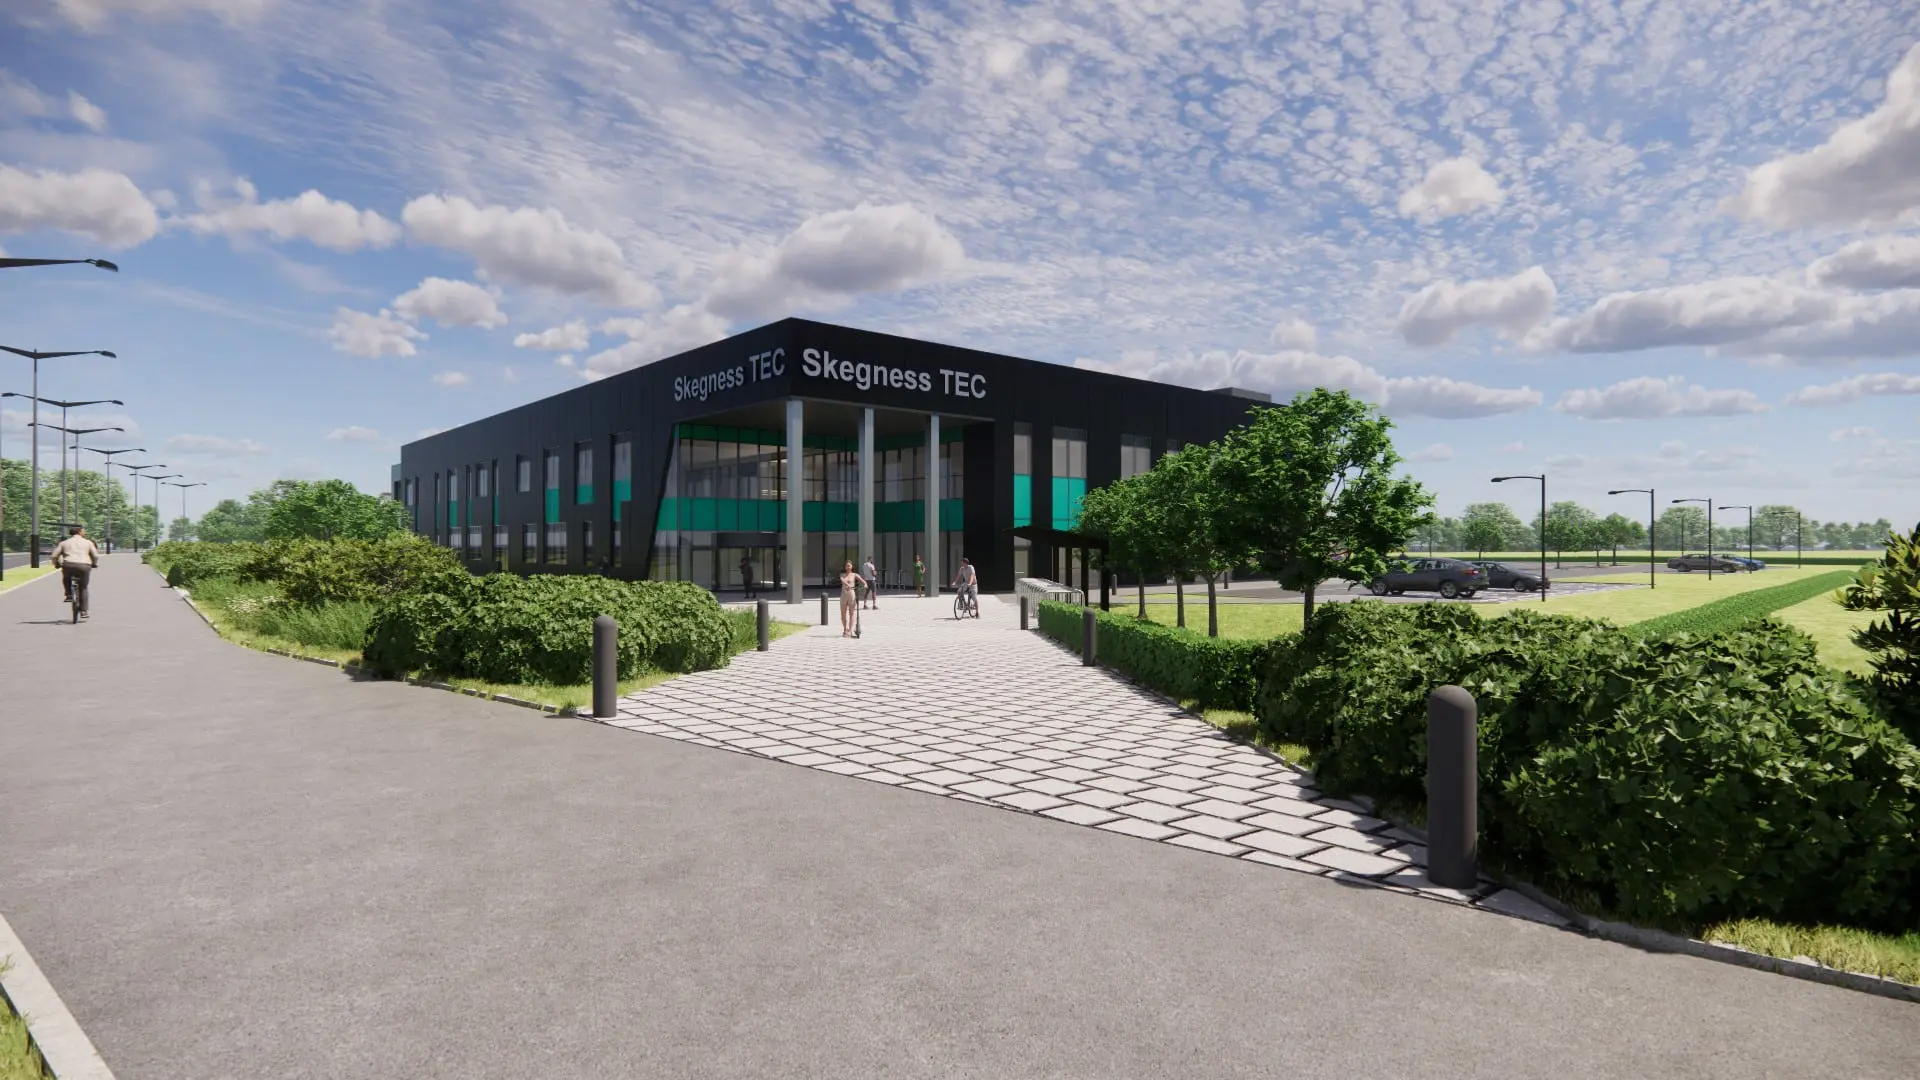 New further education campus for Skegness given go-ahead